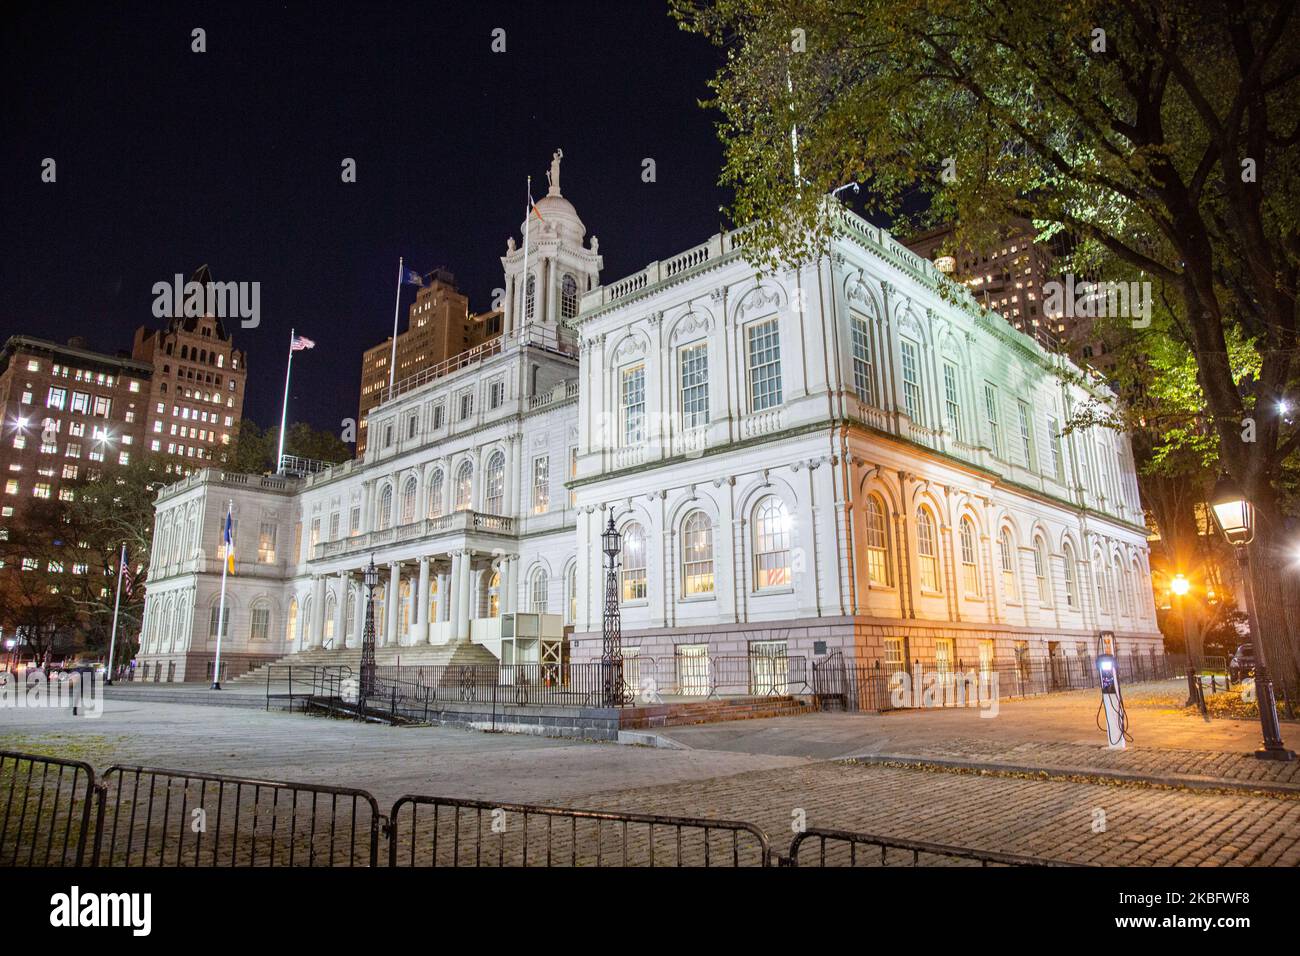 New York City Hall circa 1812 government complex, the seat of NYC government and office of the mayor, city council, located at the center of City Hall Park in the Civic Center area of Lower Manhattan, between Broadway, Park Row, and Chambers Street as seen illuminated at night. The historic building with exterior French Renaissance Revival architectural style is the oldest city hall in the United States that still houses its original governmental functions. NY, USA (Photo by Nicolas Economou/NurPhoto) Stock Photo